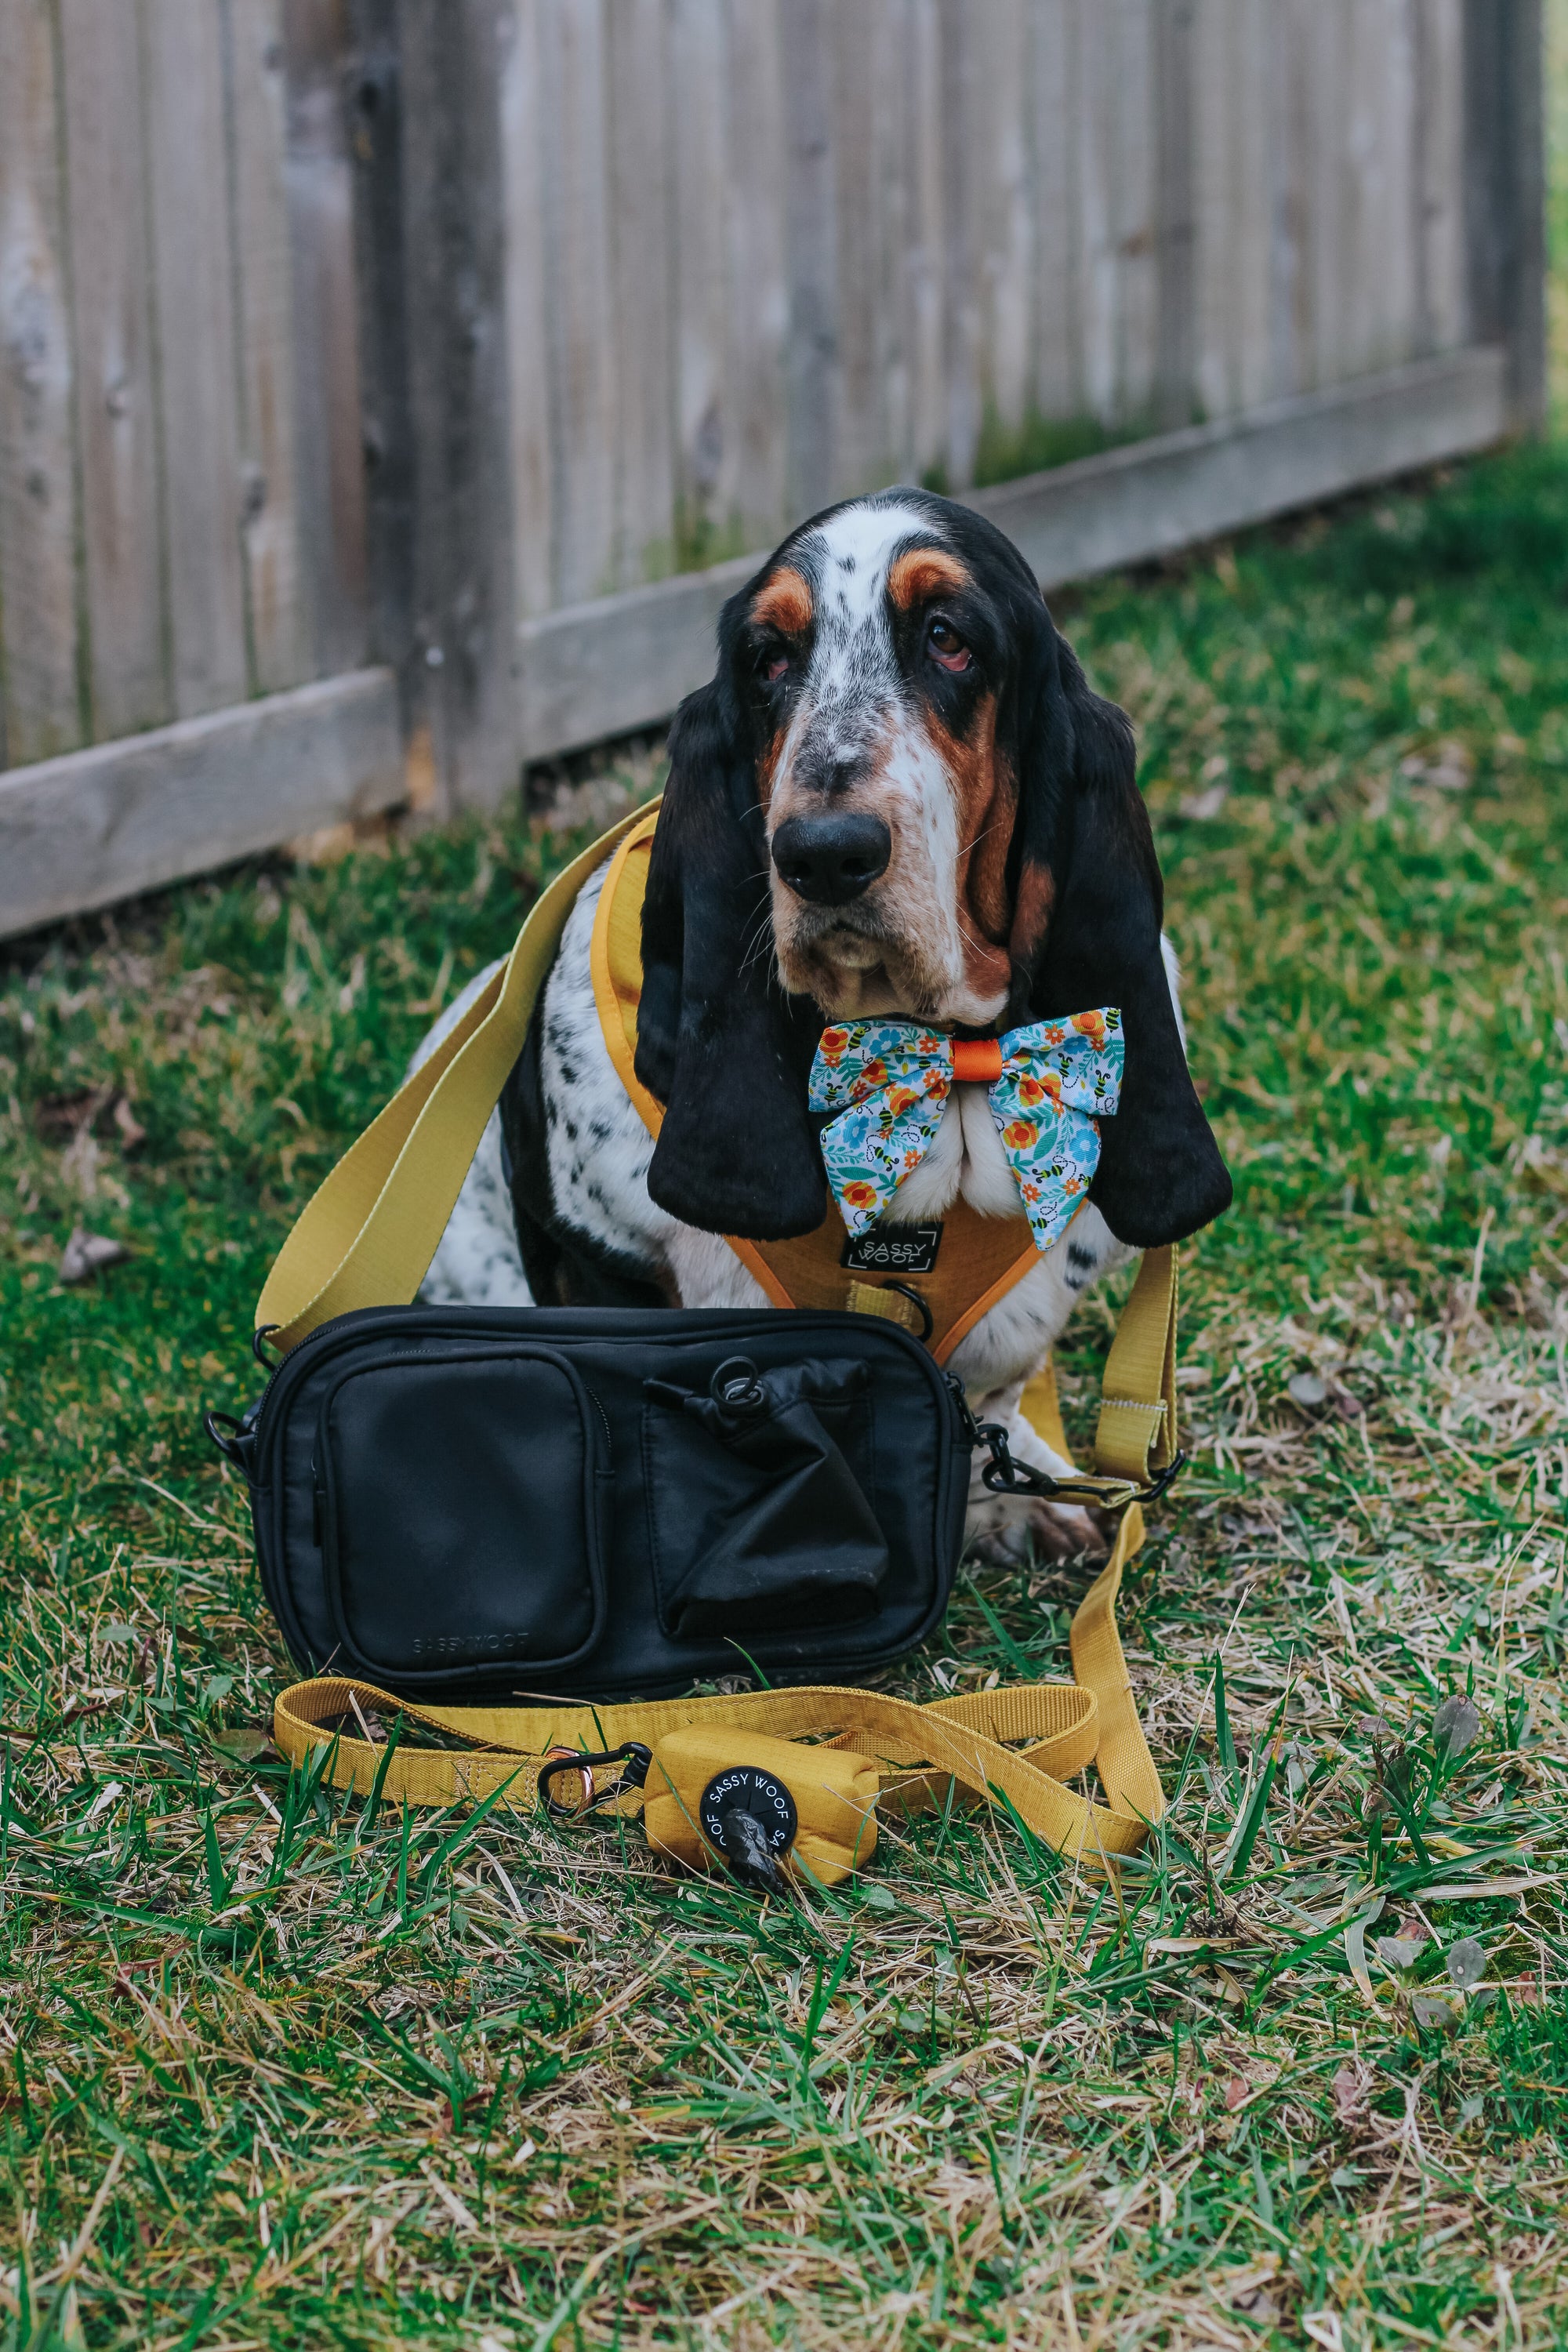 INFLUENCER_CONTENT | @DOLLY_JEAN_THE_BASSET